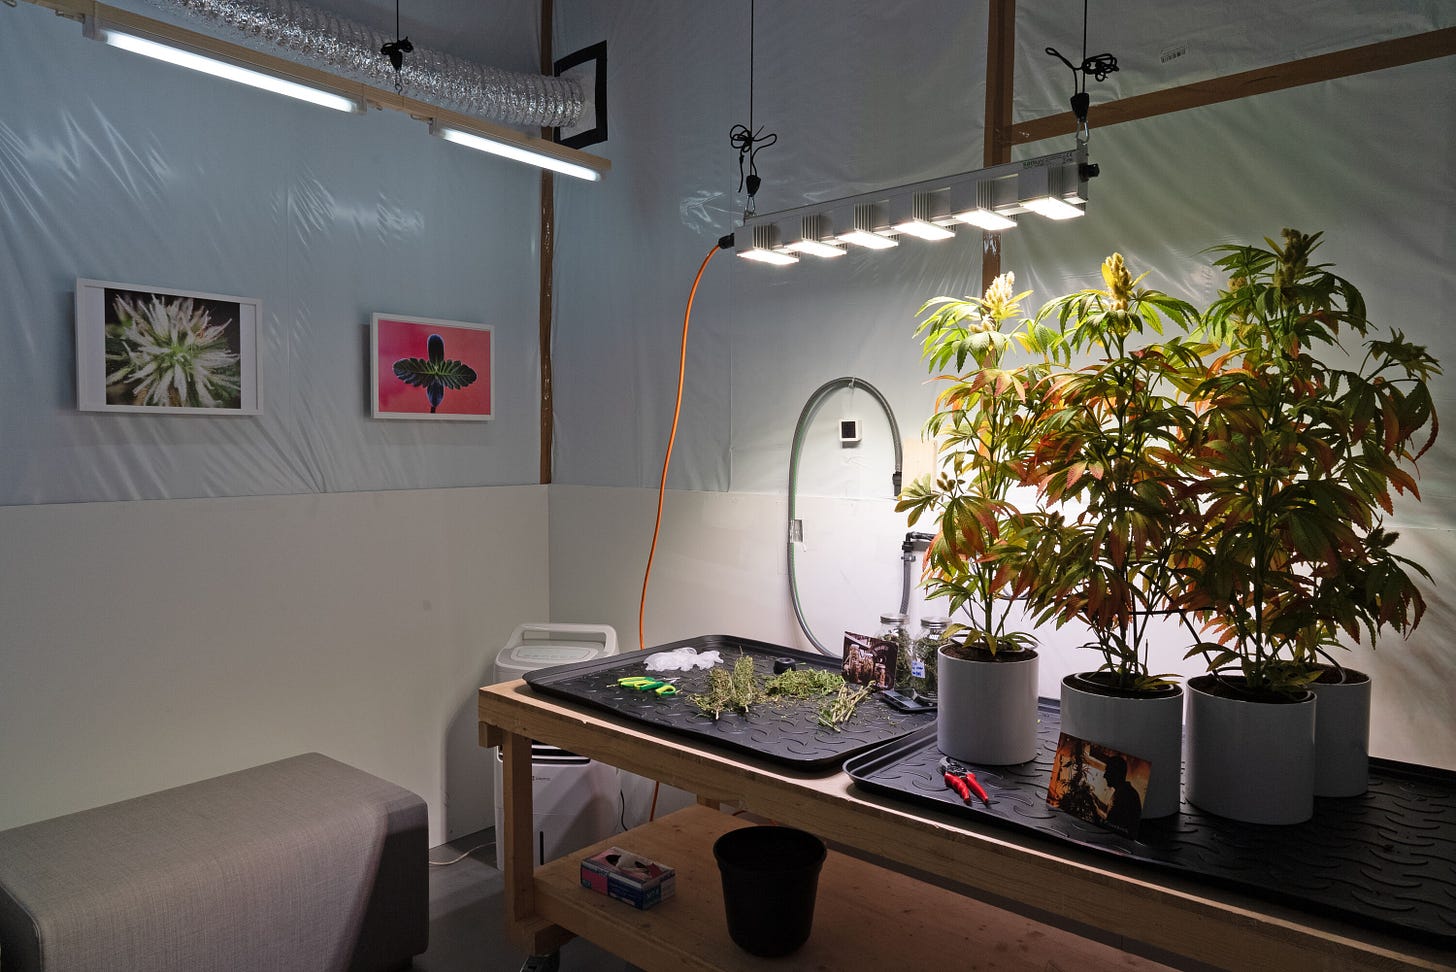 Several marijuana plants are in puts on black rubber mats in a clinical-looking studio. There are overhead lights, what looks like an air purifier, a space where the ready plants are trimmed, but no people in this photo.